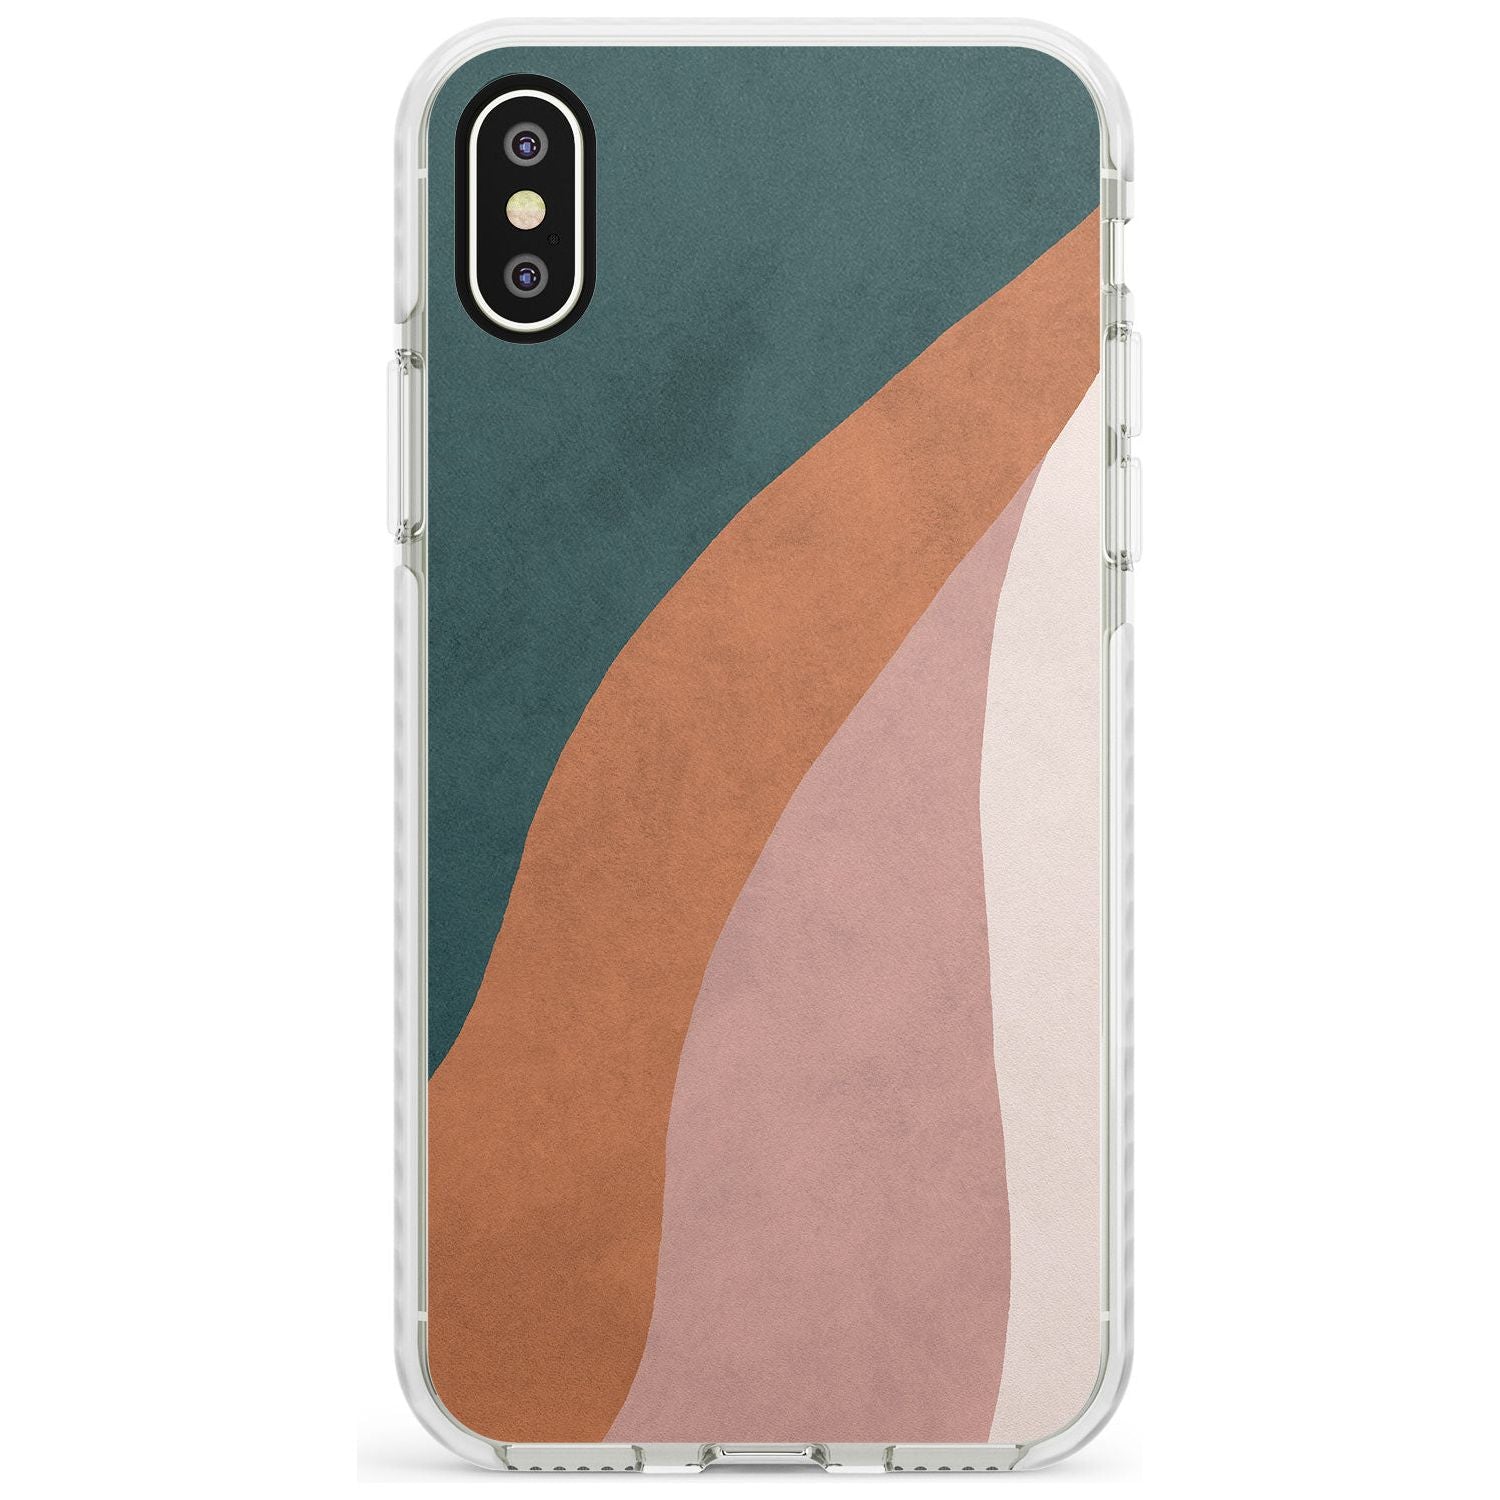 Lush Abstract Watercolour: Design #7 Impact Phone Case for iPhone X XS Max XR